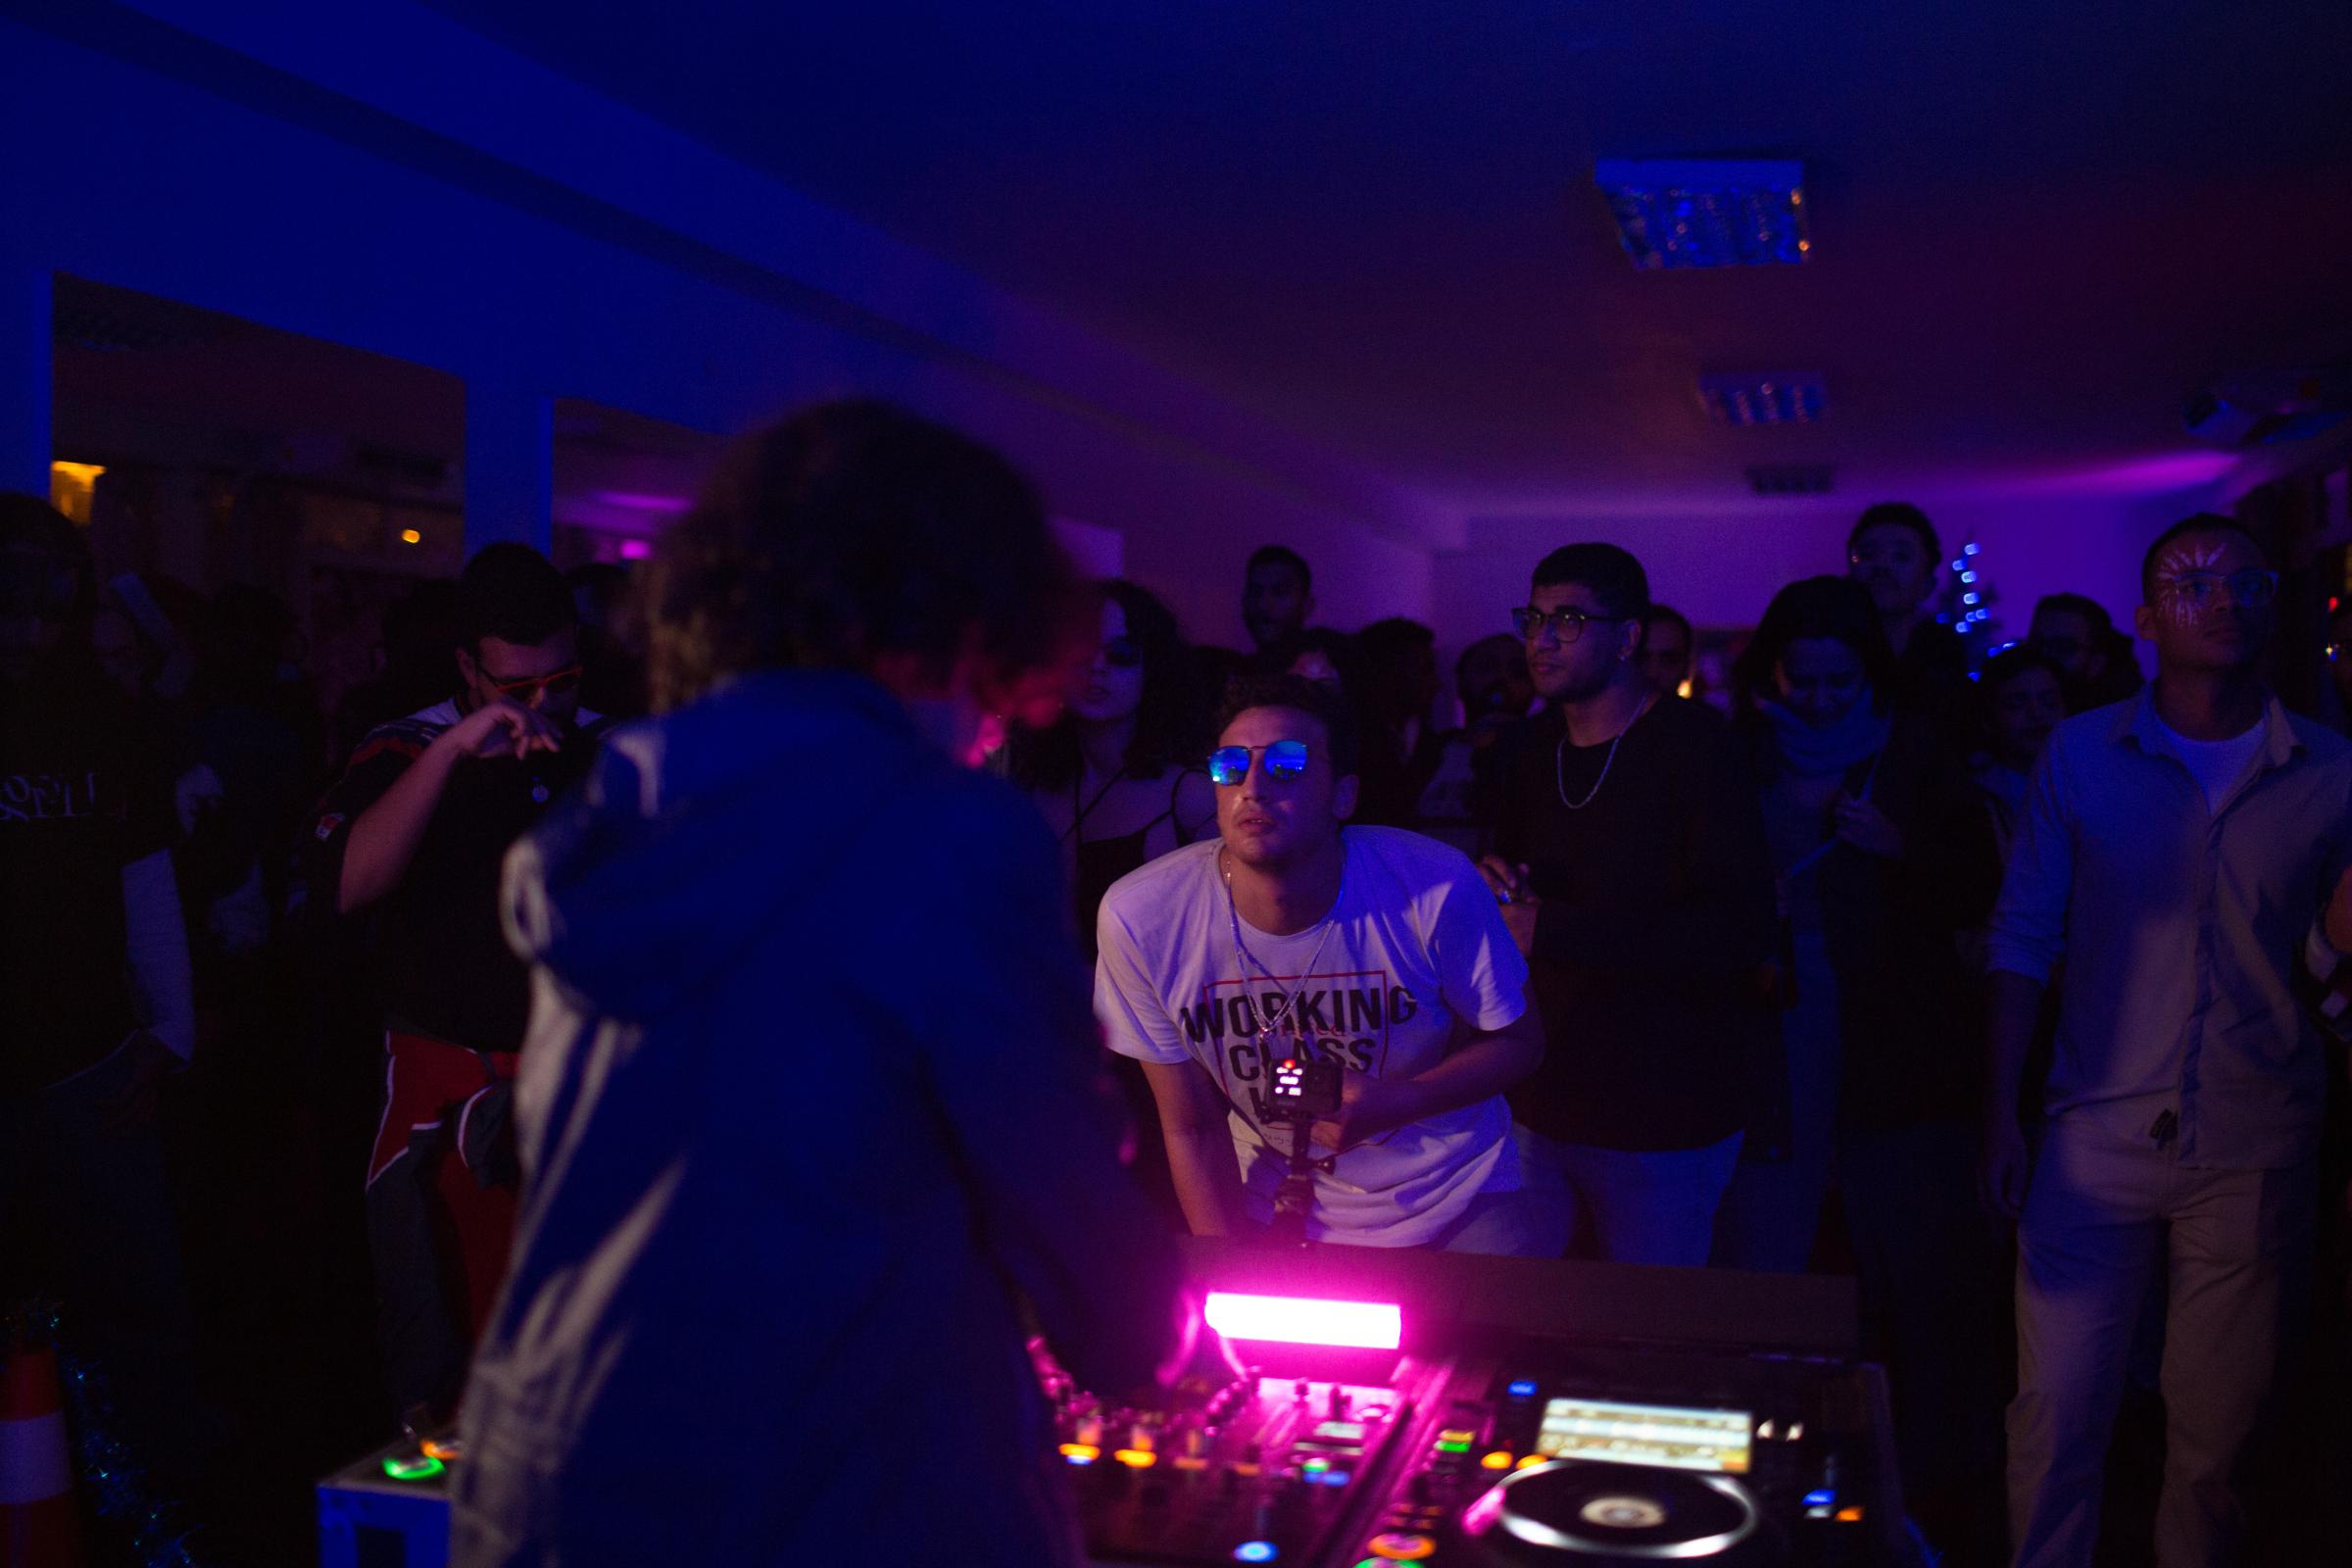 Female DJs navigate Egypt's underground music scene -  People attend a concert as Donia Shohdy, or...